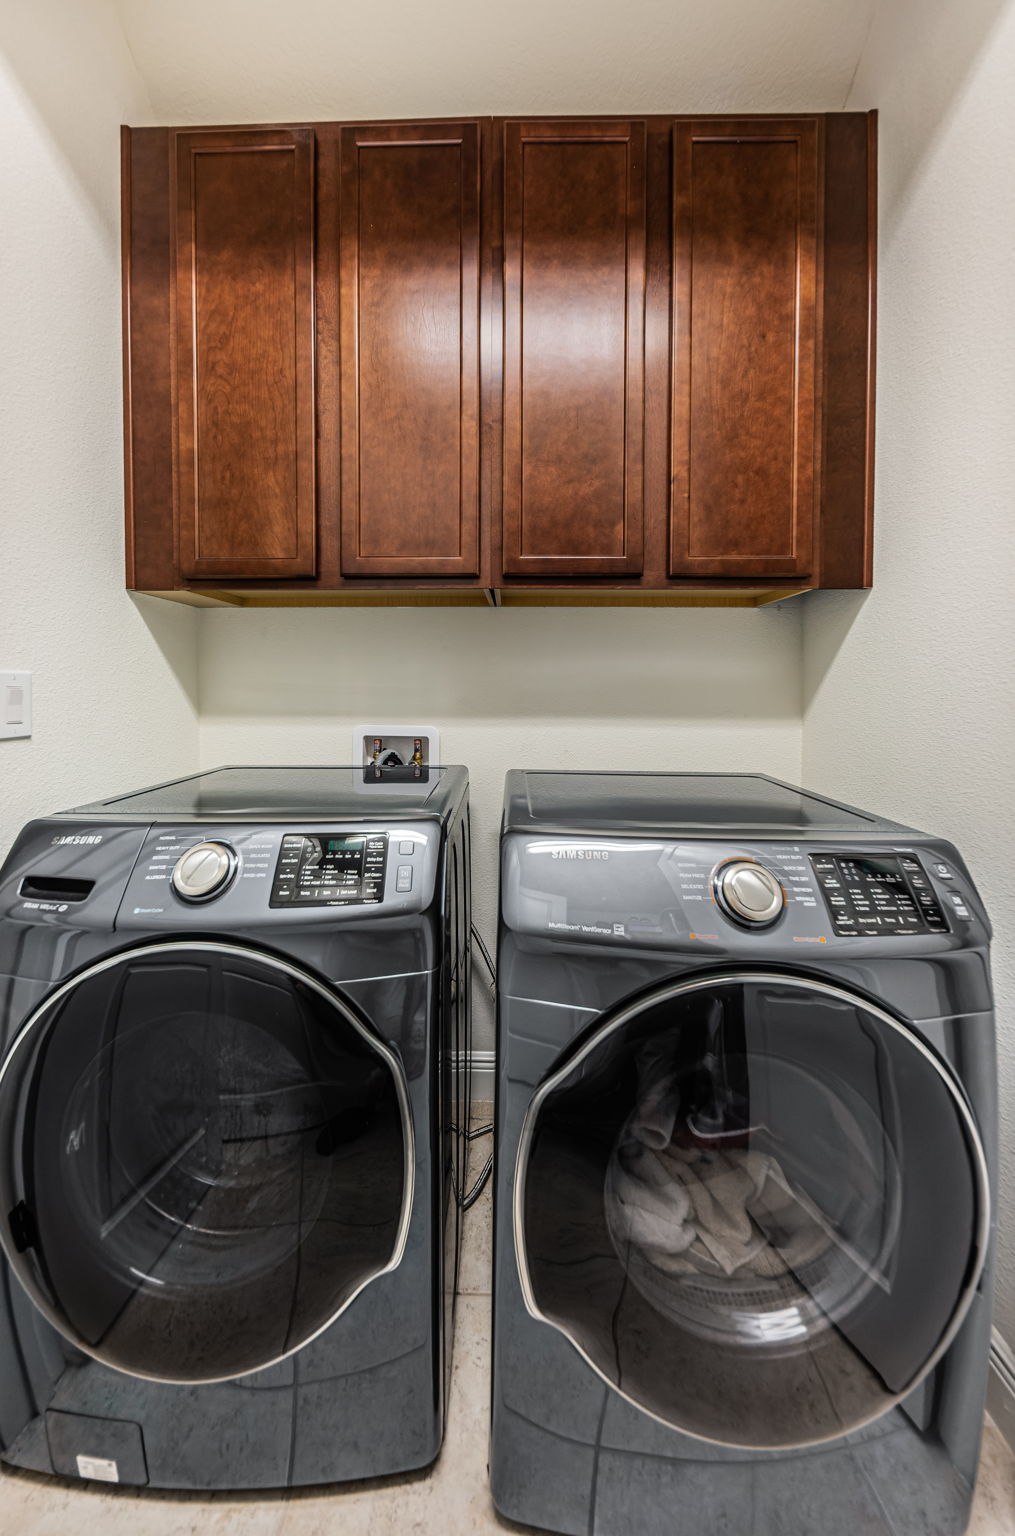 First Floor Laundry